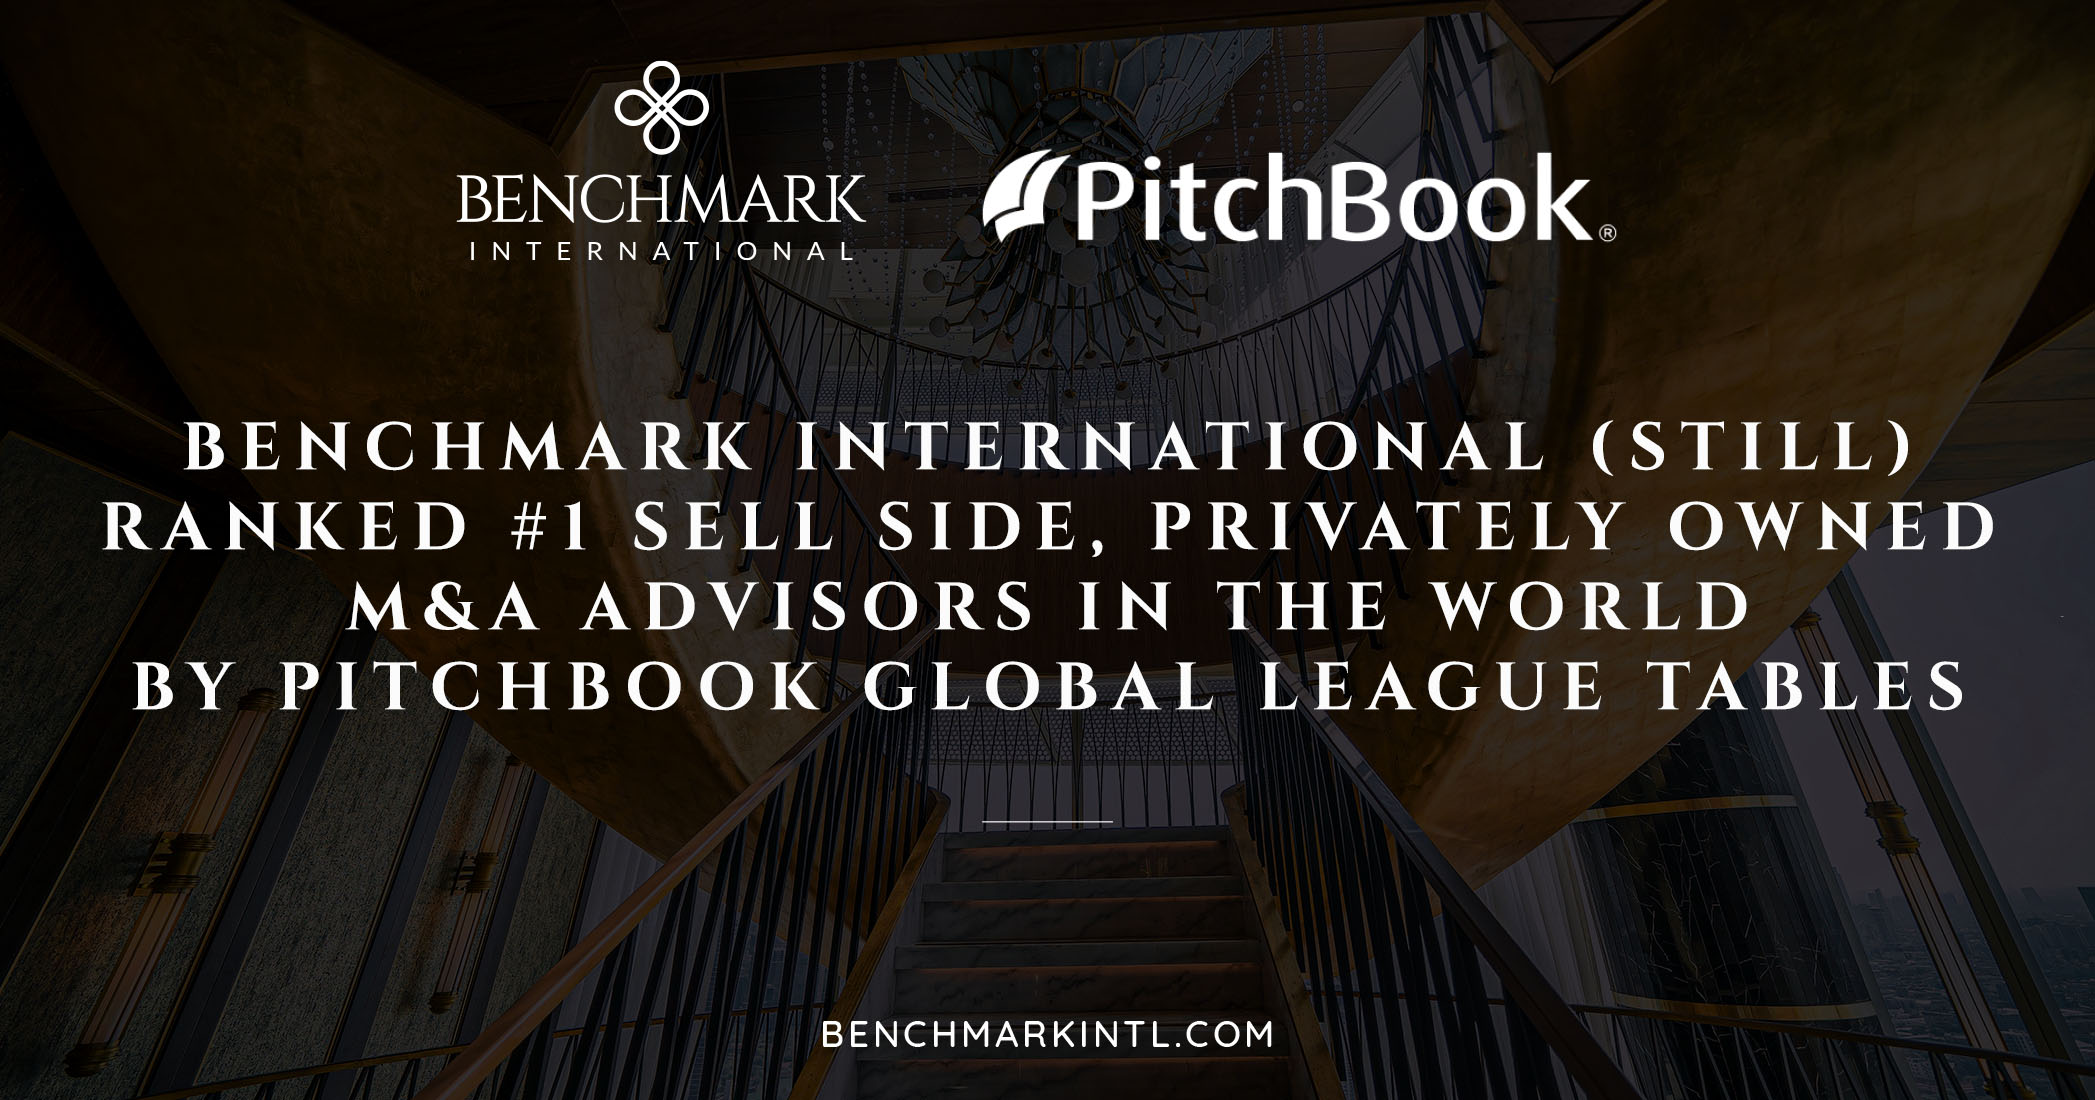 Benchmark International (Still) Ranked #1 Sell-Side, Privately Owned M&A Advisors In The World By Pitchbook Global League Tables